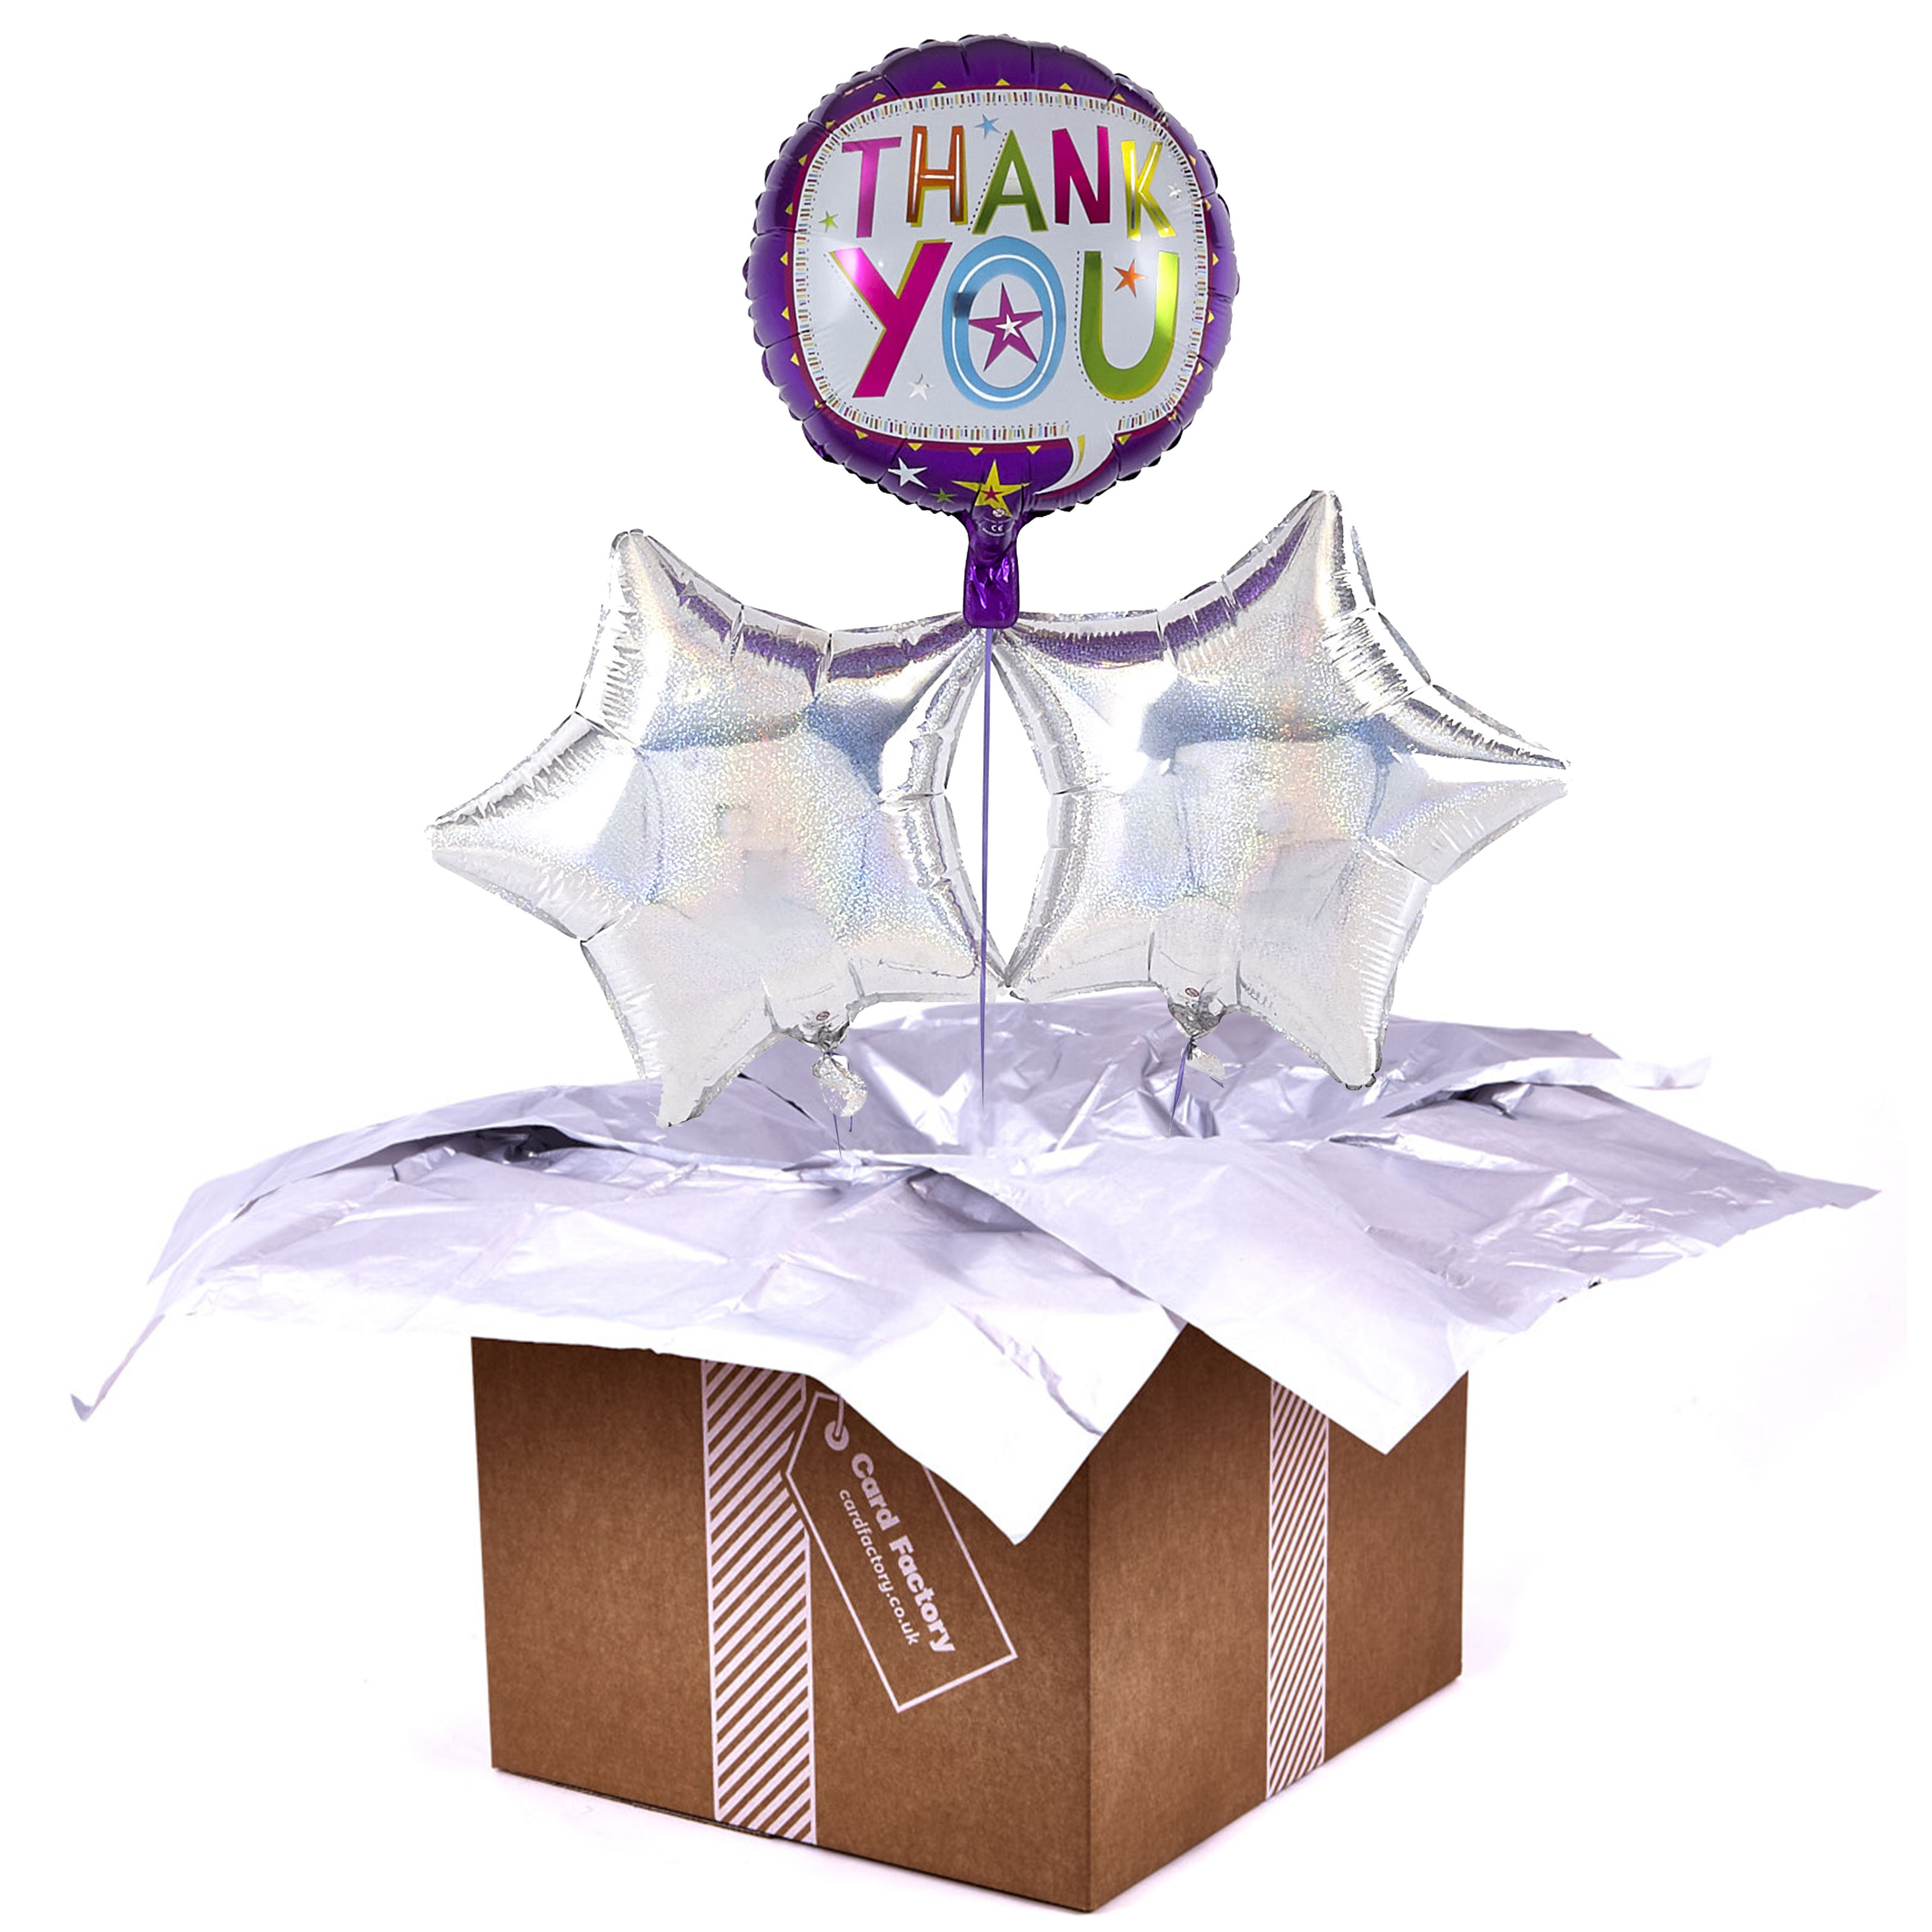 Purple Thank You Balloon with Silver Balloon Bouquet - DELIVERED INFLATED!